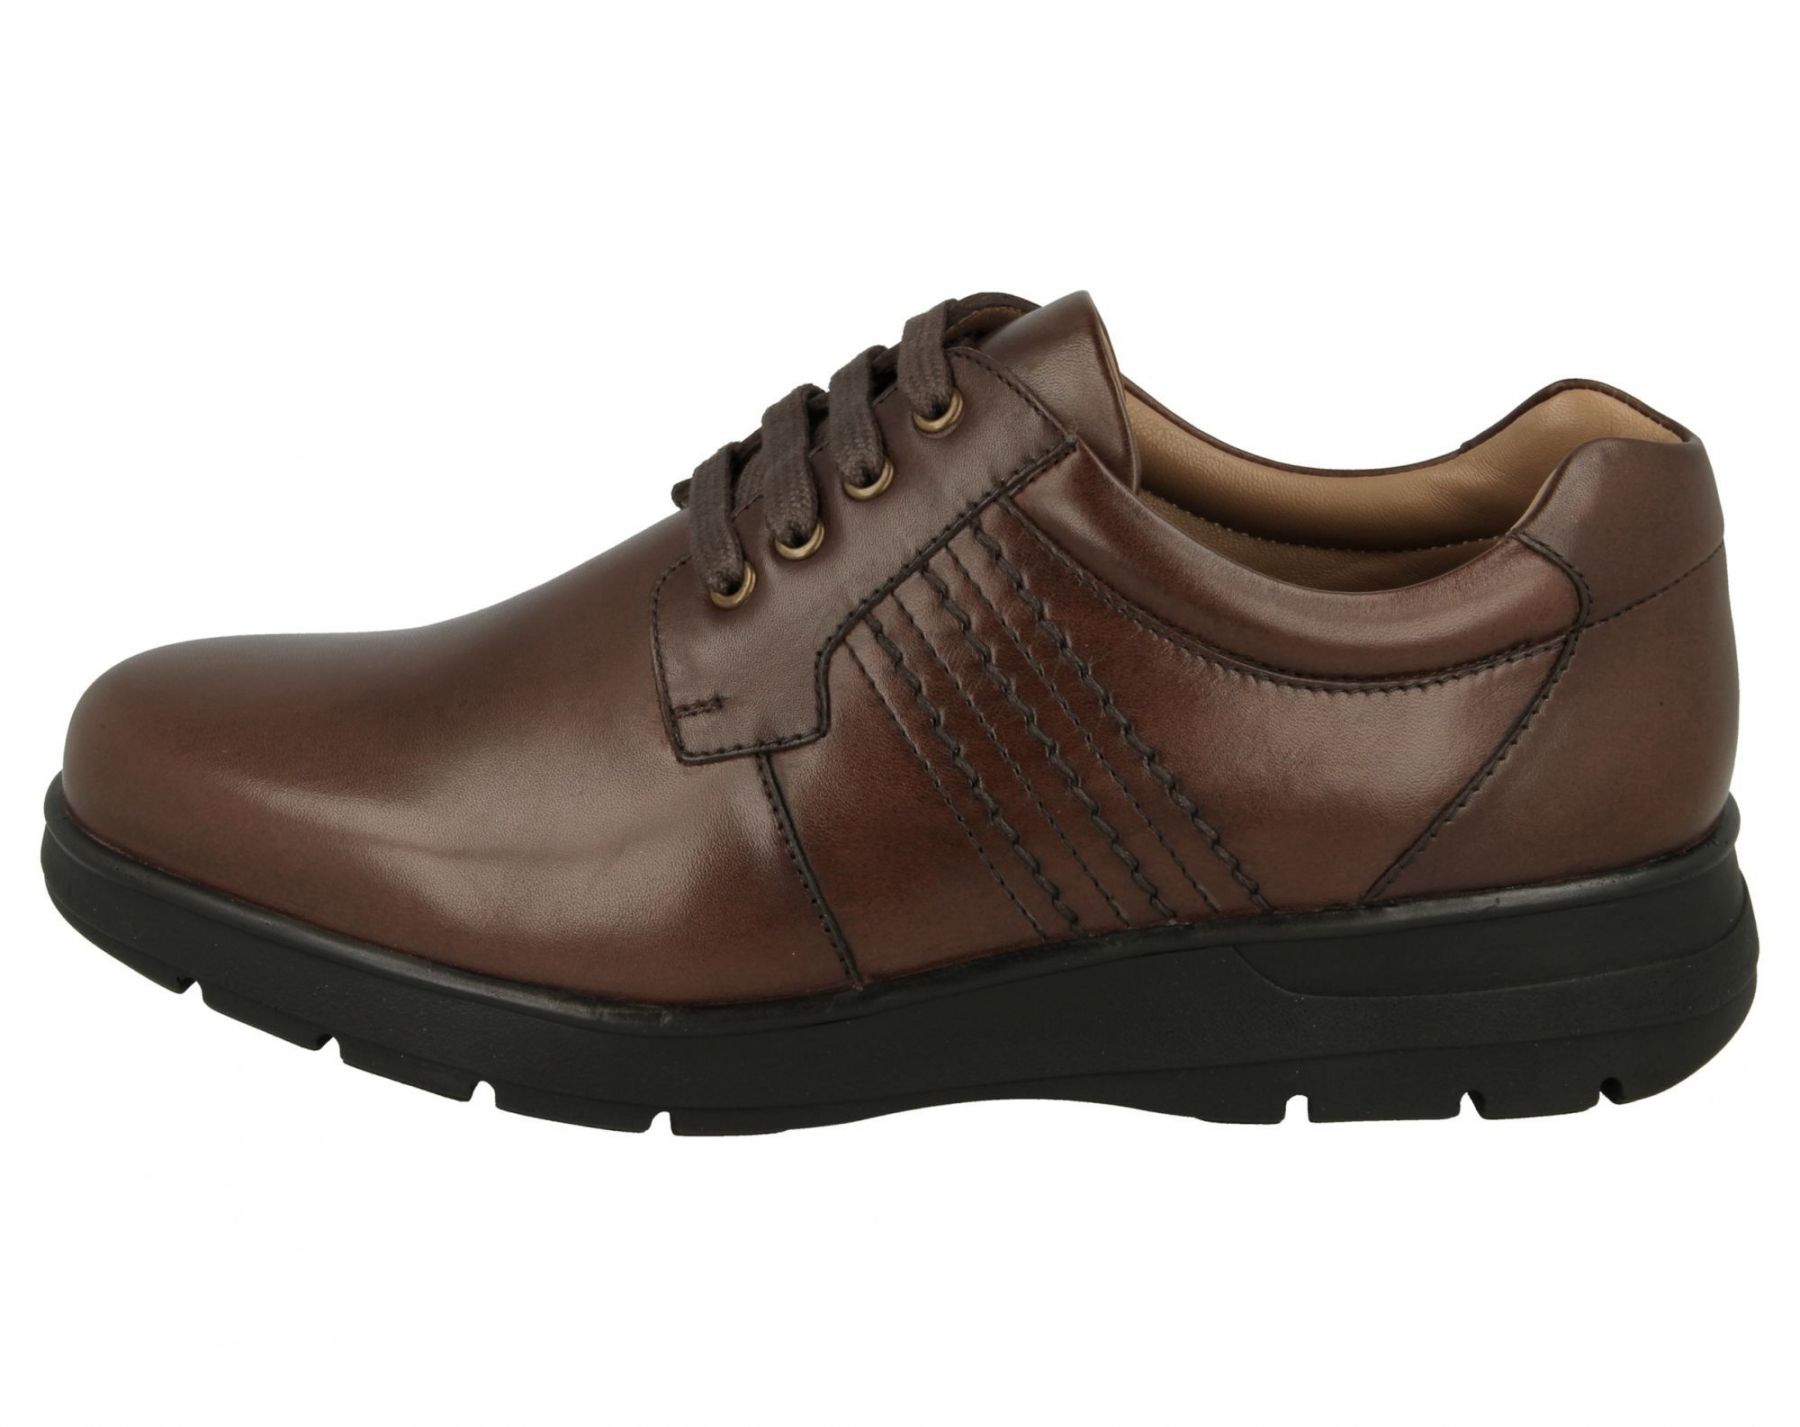 Men's DB Wider Fit Chatham Leather Lace-Up Shoes - Brown